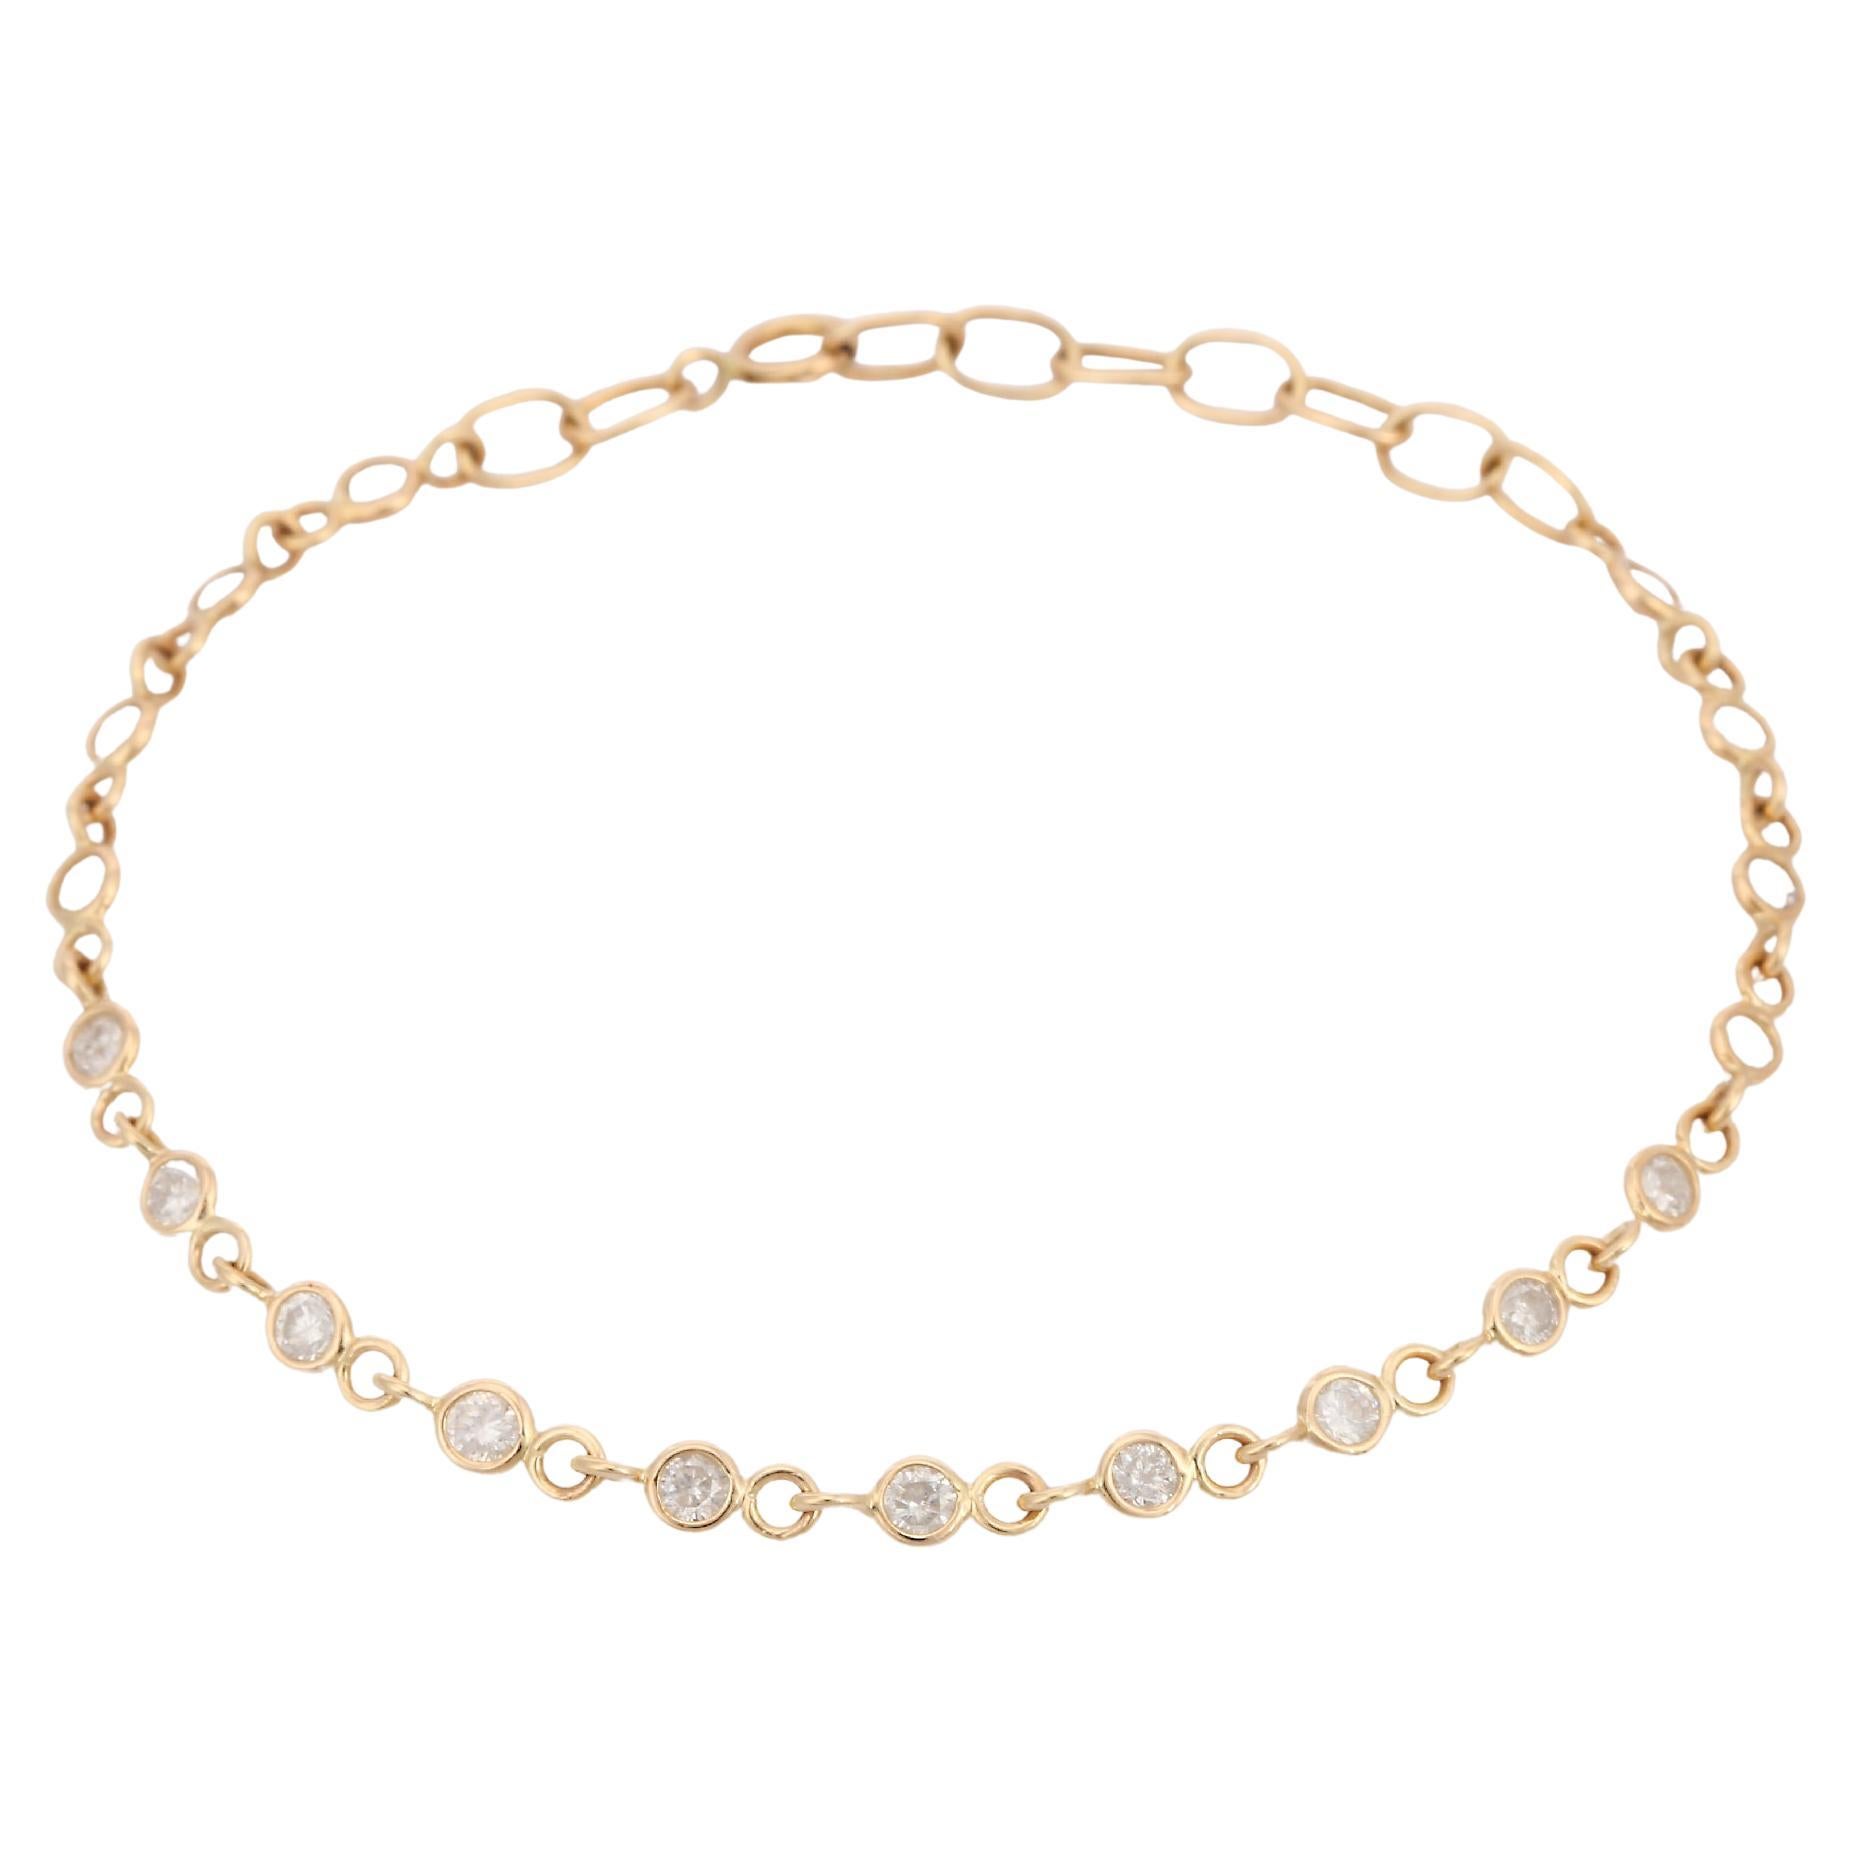 Stackable 1.24 ct Natural Diamond Chain Bracelet in 14K Solid Yellow Gold